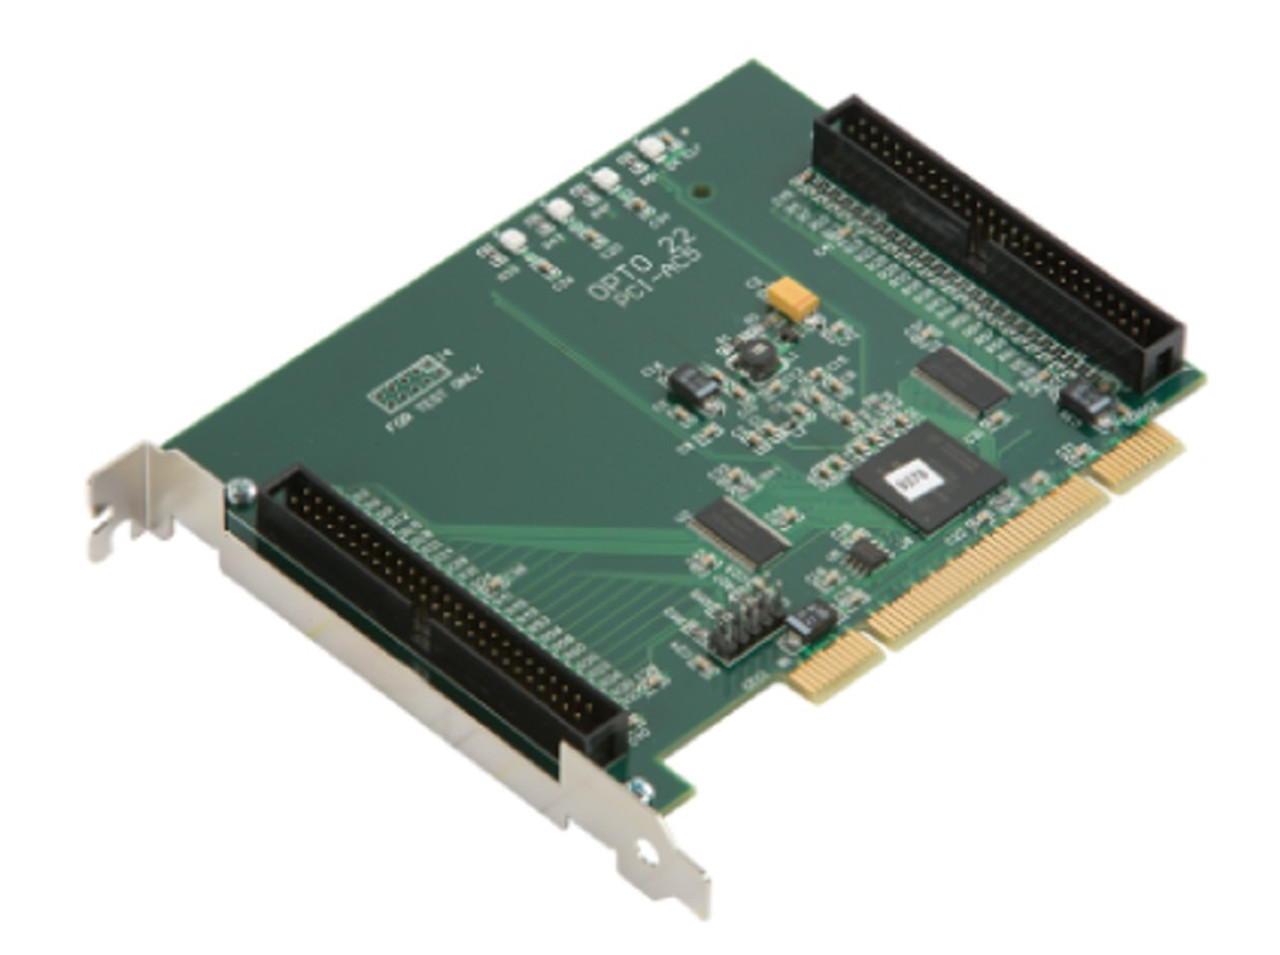 Opto 22 PCI-AC5 PCI Adapter Card for Direct I/O [New]